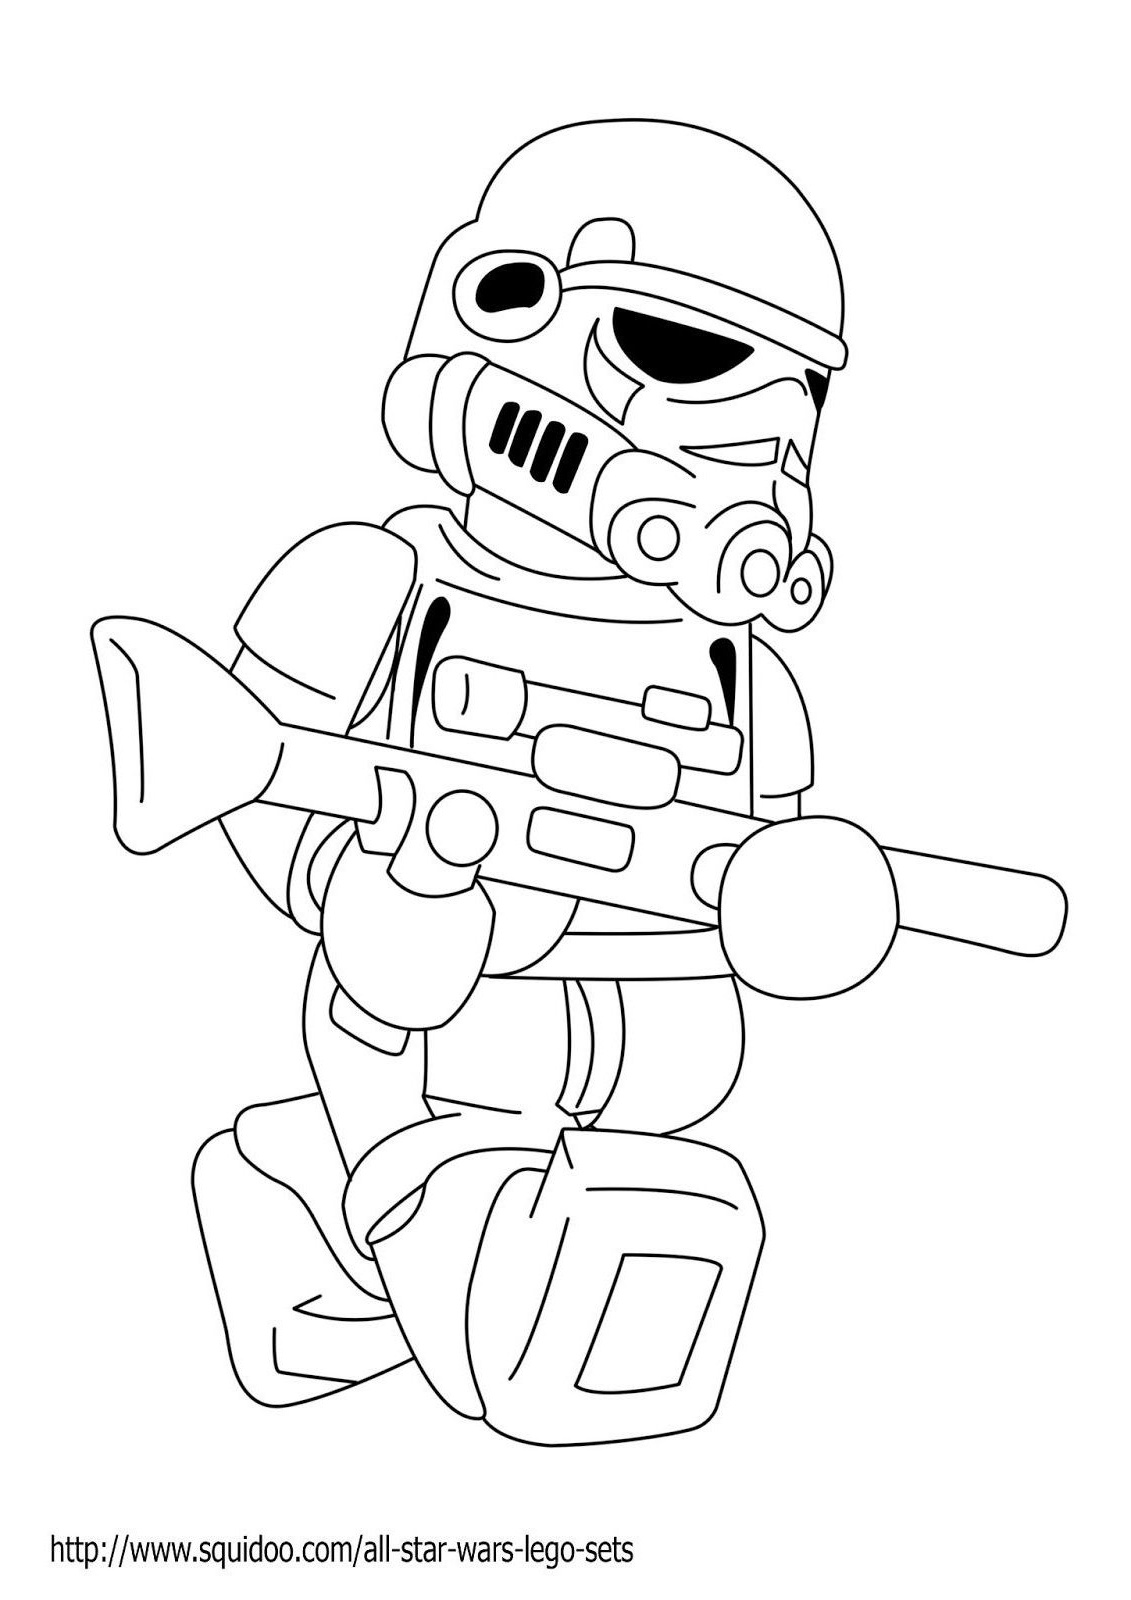 Coloriage Stormtrooper Beau Image 8 Inhabituellement Stormtrooper Coloriage En 2020